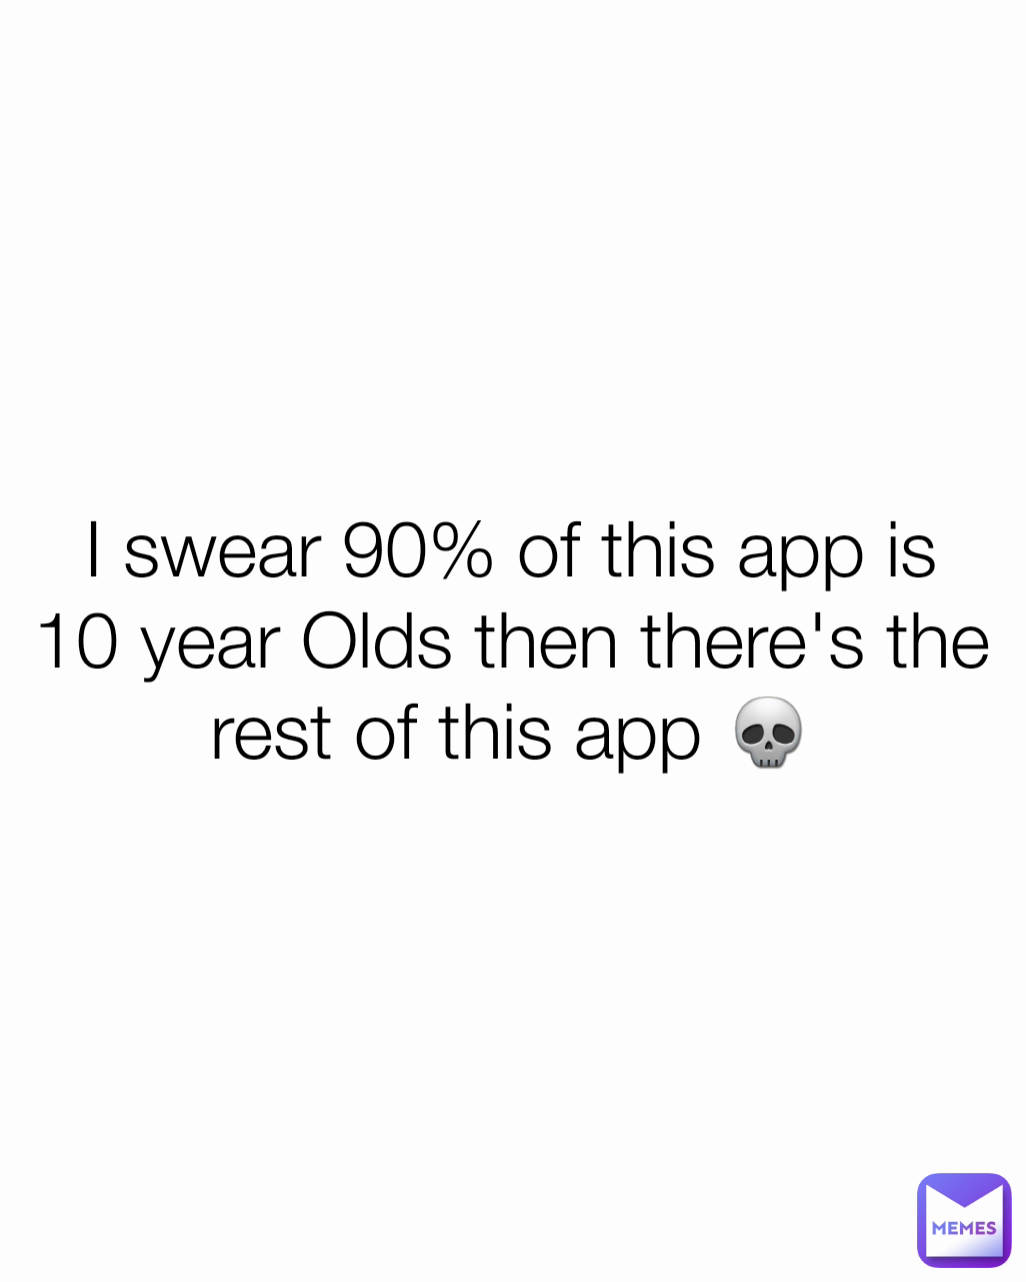 I swear 90% of this app is 10 year Olds then there's the rest of this app 💀